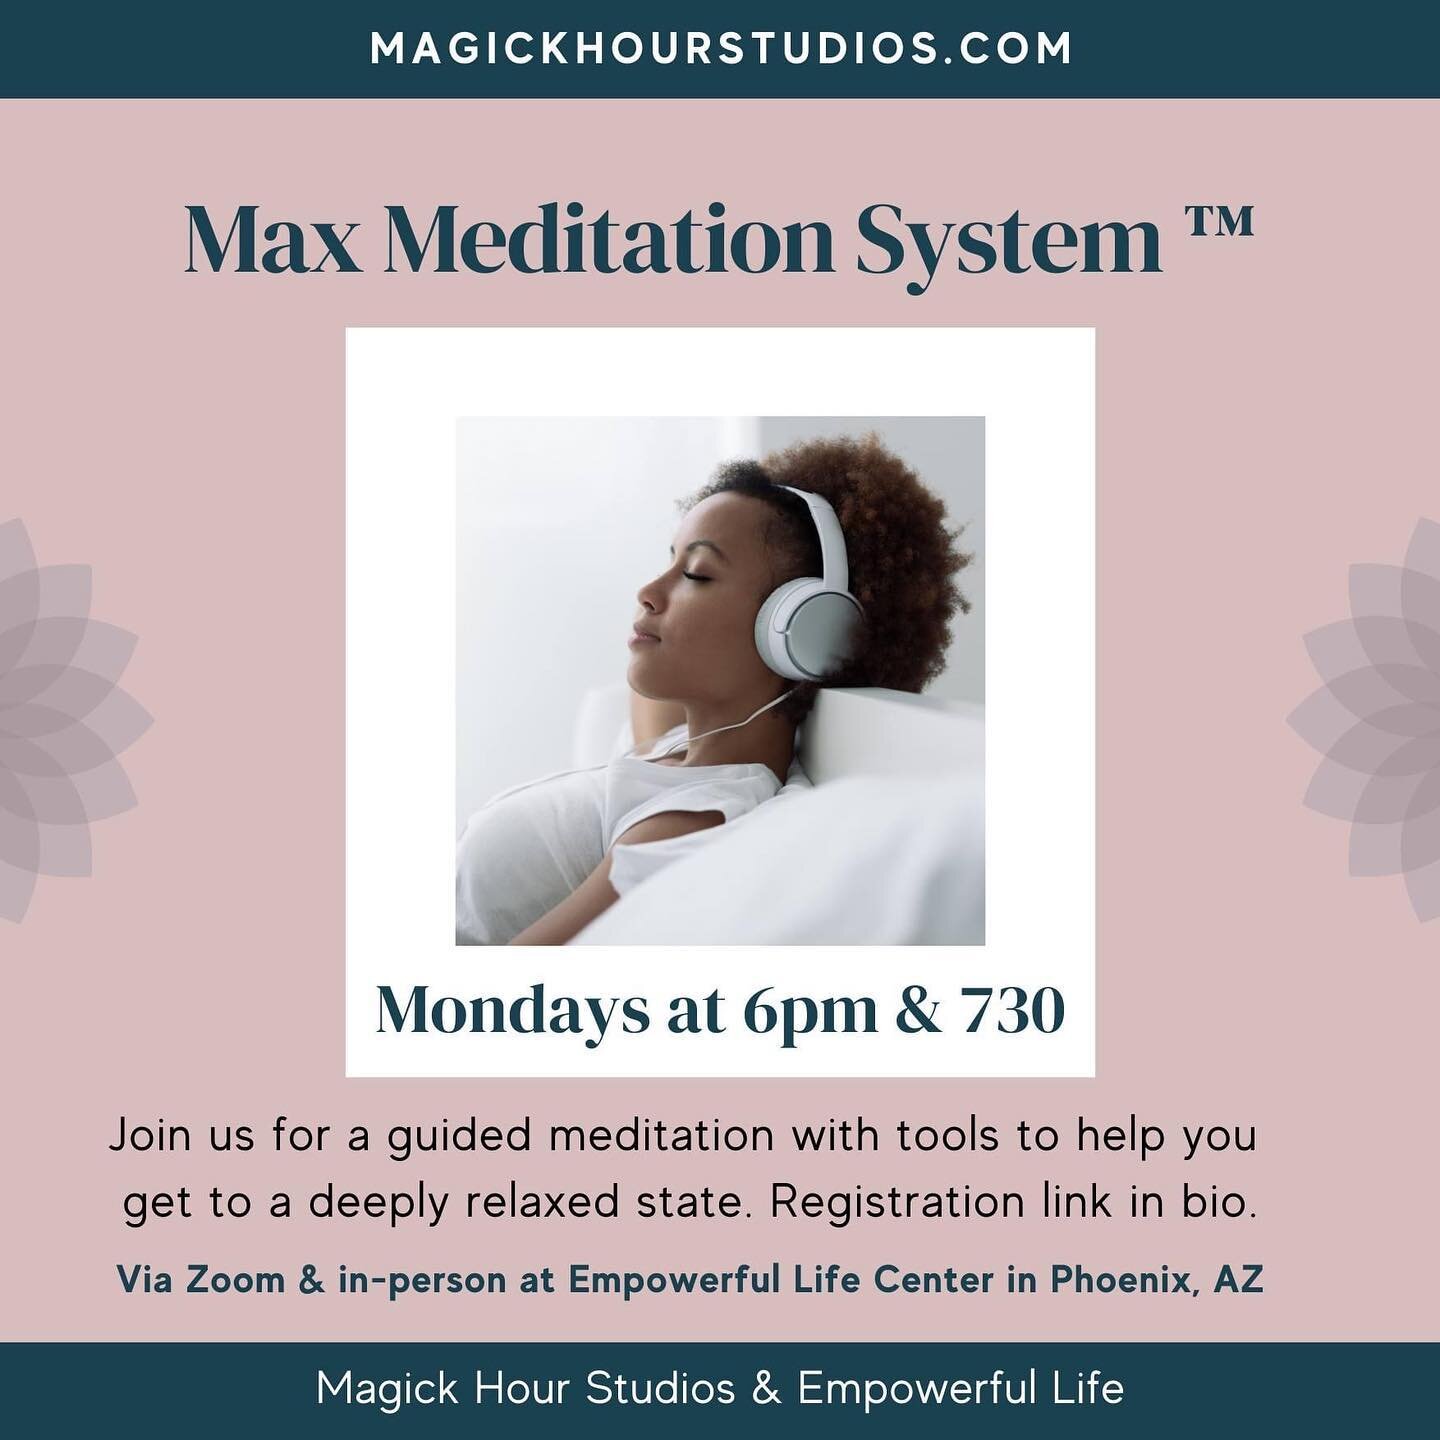 Coming up on Monday at 6pm and again at 730 is Max Meditation! You can attend via zoom or in-person at Empowerful Life in Phoenix.

Energy exchange is $10.

Right now, AZ time and Pacific time are the same. I can't wait to see you all there!

#maxmed